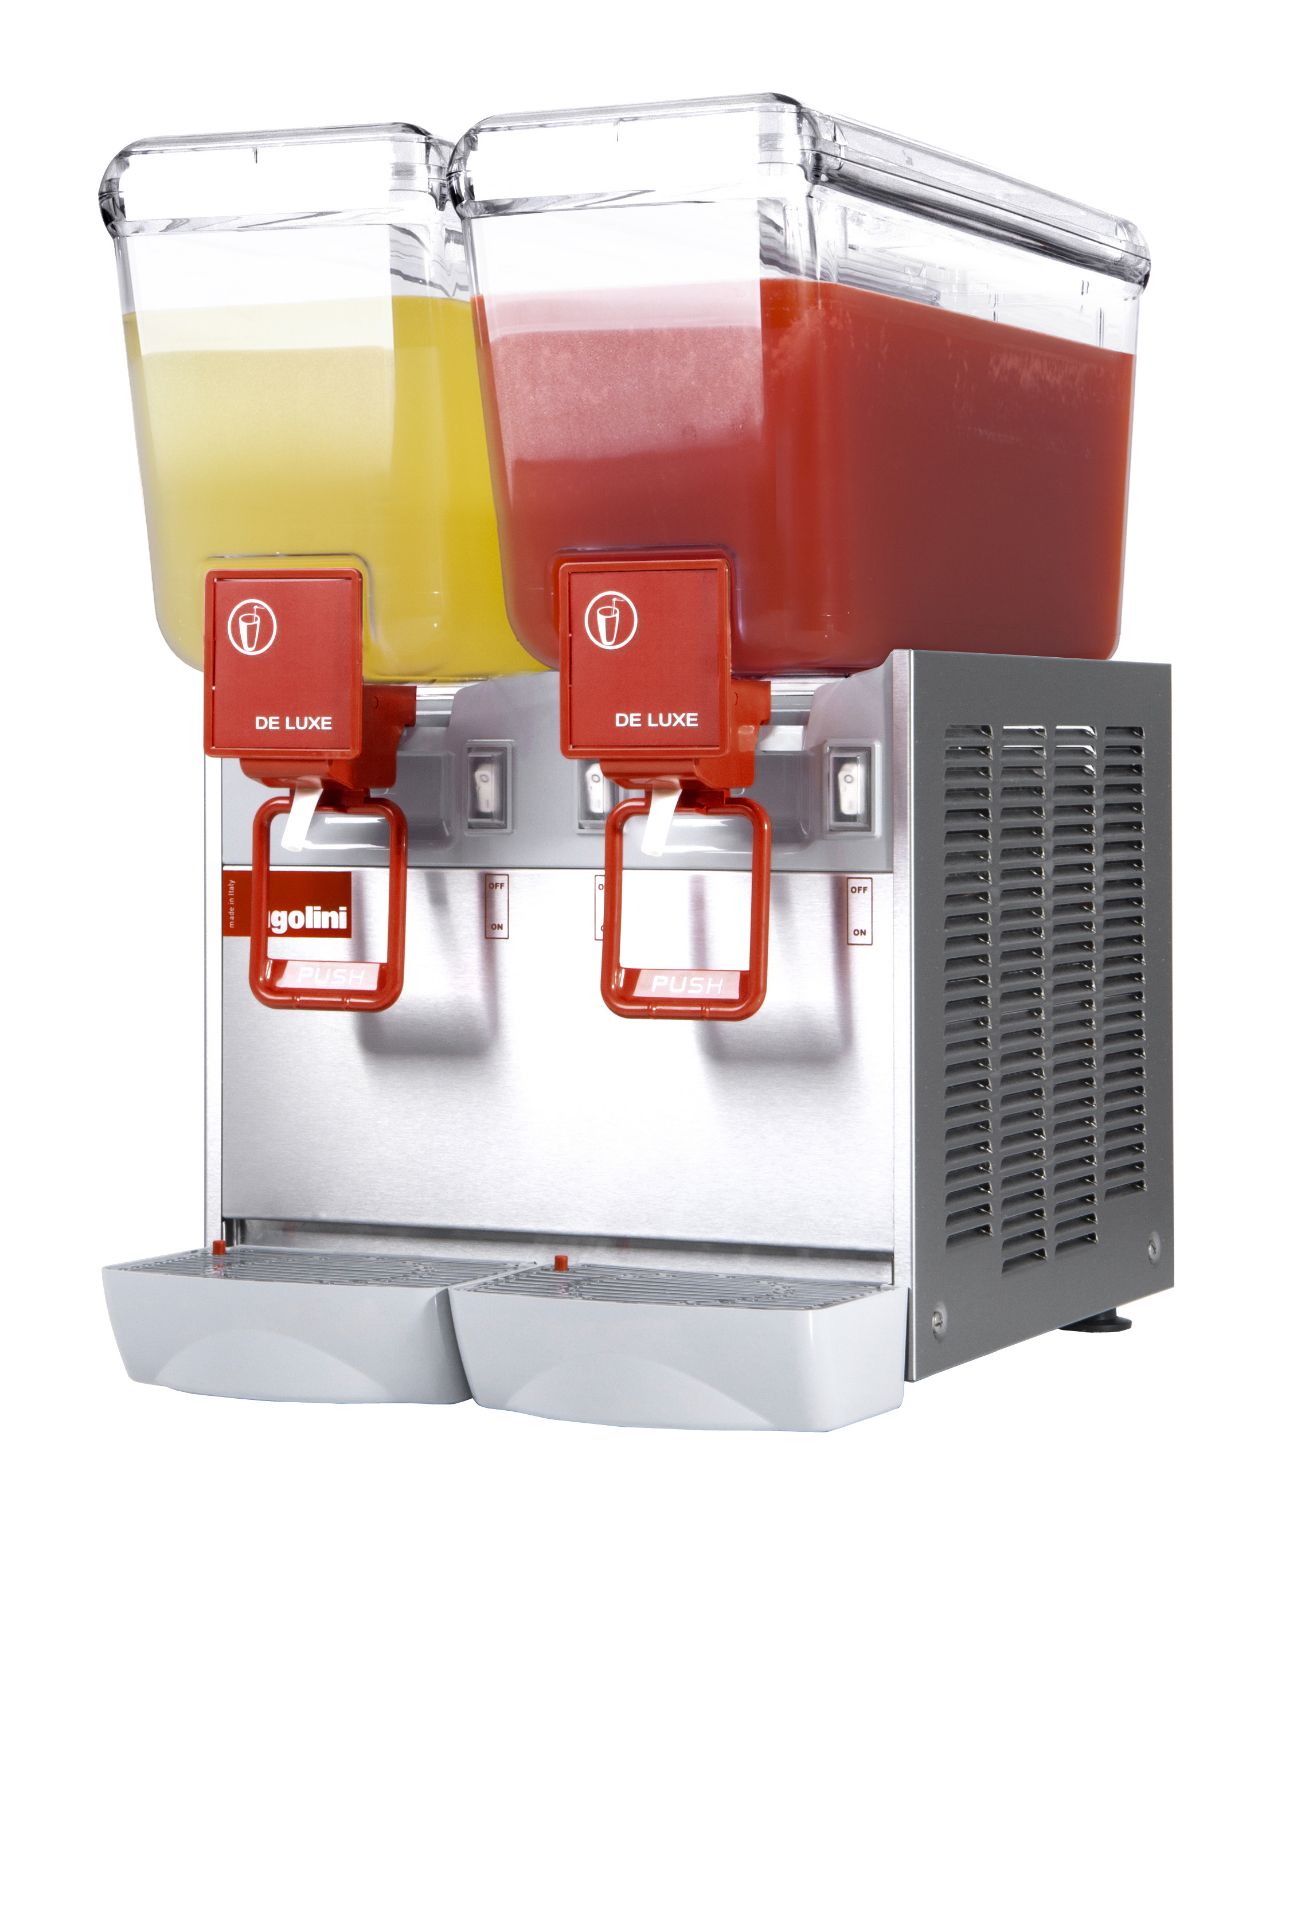 Ugolini Arctic Compact Two Bowl Drinks Chiller / Dispenser – BRAND NEW   The Arctic Deluxe comes